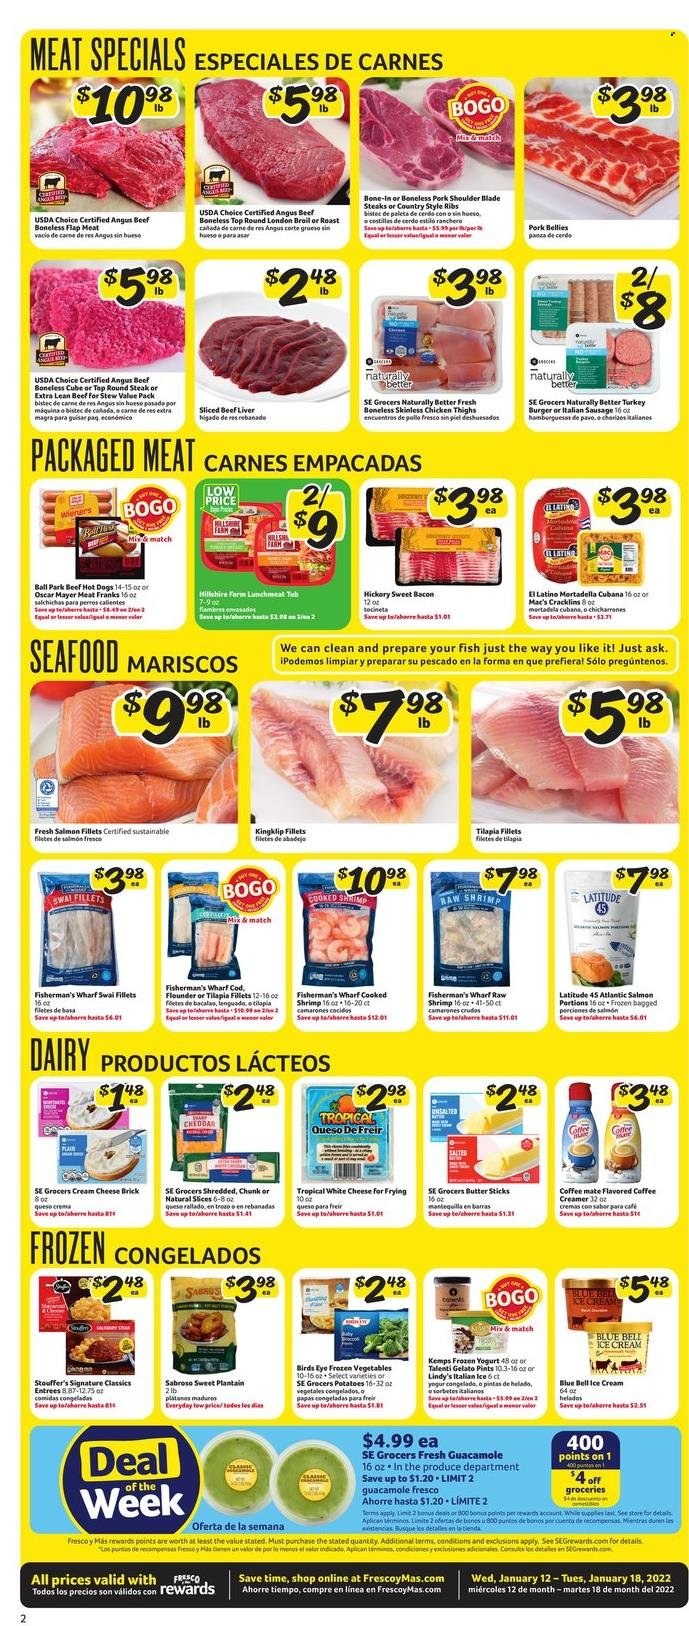 thumbnail - Fresco y Más Flyer - 01/12/2022 - 01/18/2022 - Sales products - potatoes, cod, flounder, salmon, salmon fillet, tilapia, seafood, fish, shrimps, swai fillet, hot dog, hamburger, Bird's Eye, bacon, mortadella, Oscar Mayer, sausage, italian sausage, guacamole, lunch meat, cream cheese, cheddar, cheese, Kemps, yoghurt, Coffee-Mate, butter, creamer, ice cream, Talenti Gelato, gelato, Blue Bell, frozen vegetables, Stouffer's, Mac’s, beef liver, beef meat, steak, round steak, turkey burger, pork belly, pork meat, pork ribs, pork shoulder, country style ribs. Page 2.